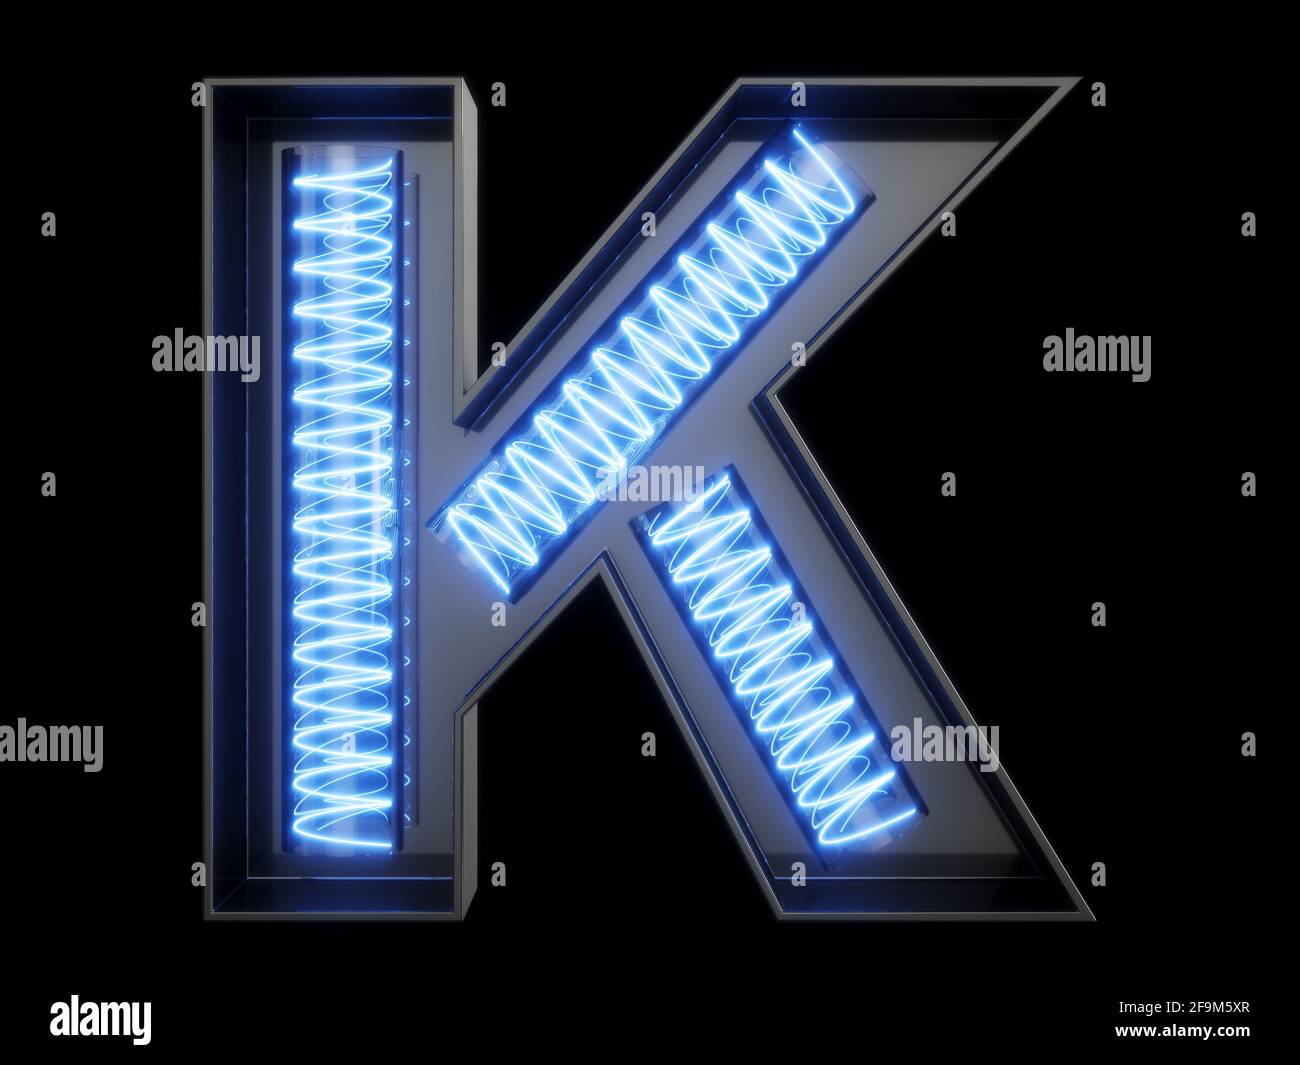 Light bulb glowing letter alphabet character K font. Front view illuminated capital symbol on black background. 3d rendering illustration Stock Photo